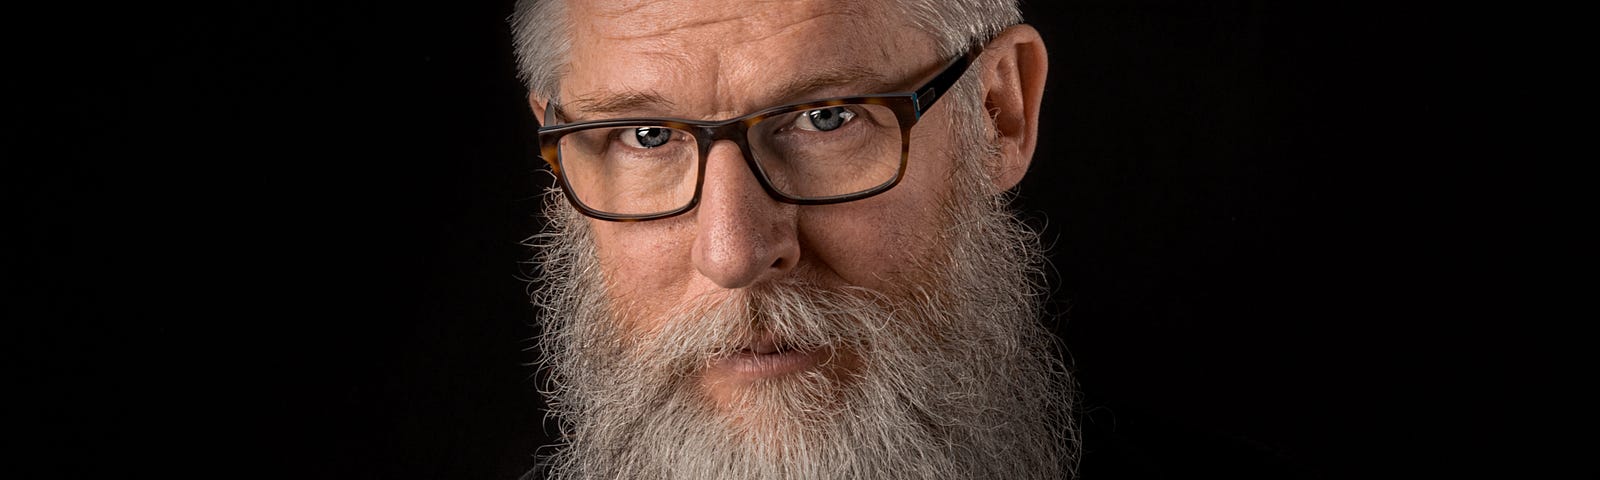 Man with white hair and beard wearing glasses and a black shirt on a black background